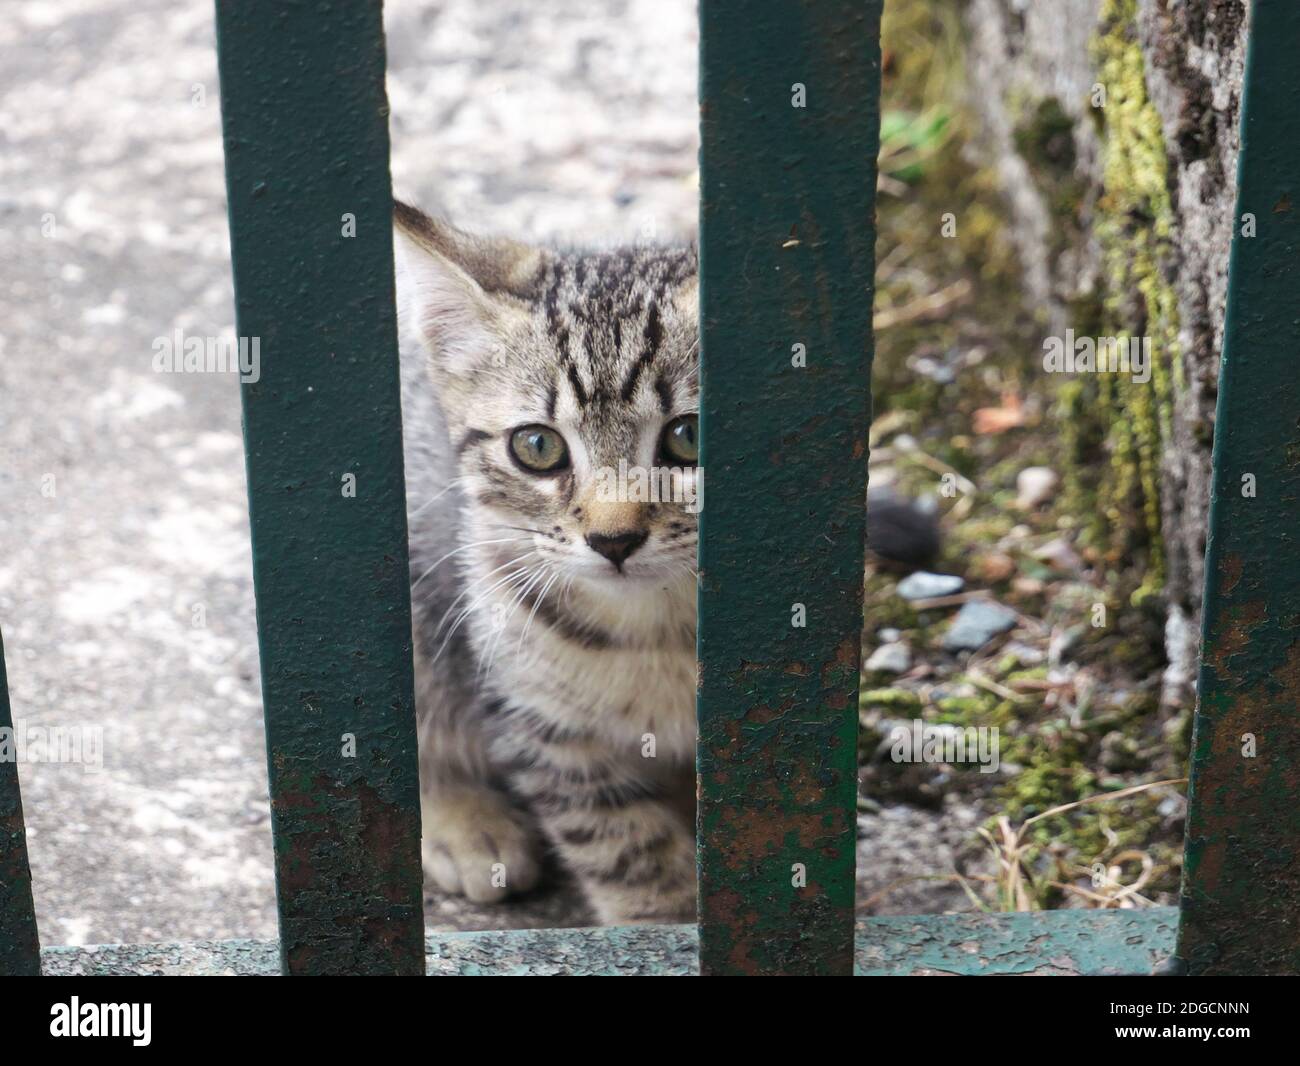 Picture of a kitten locked behind bars Stock Photo